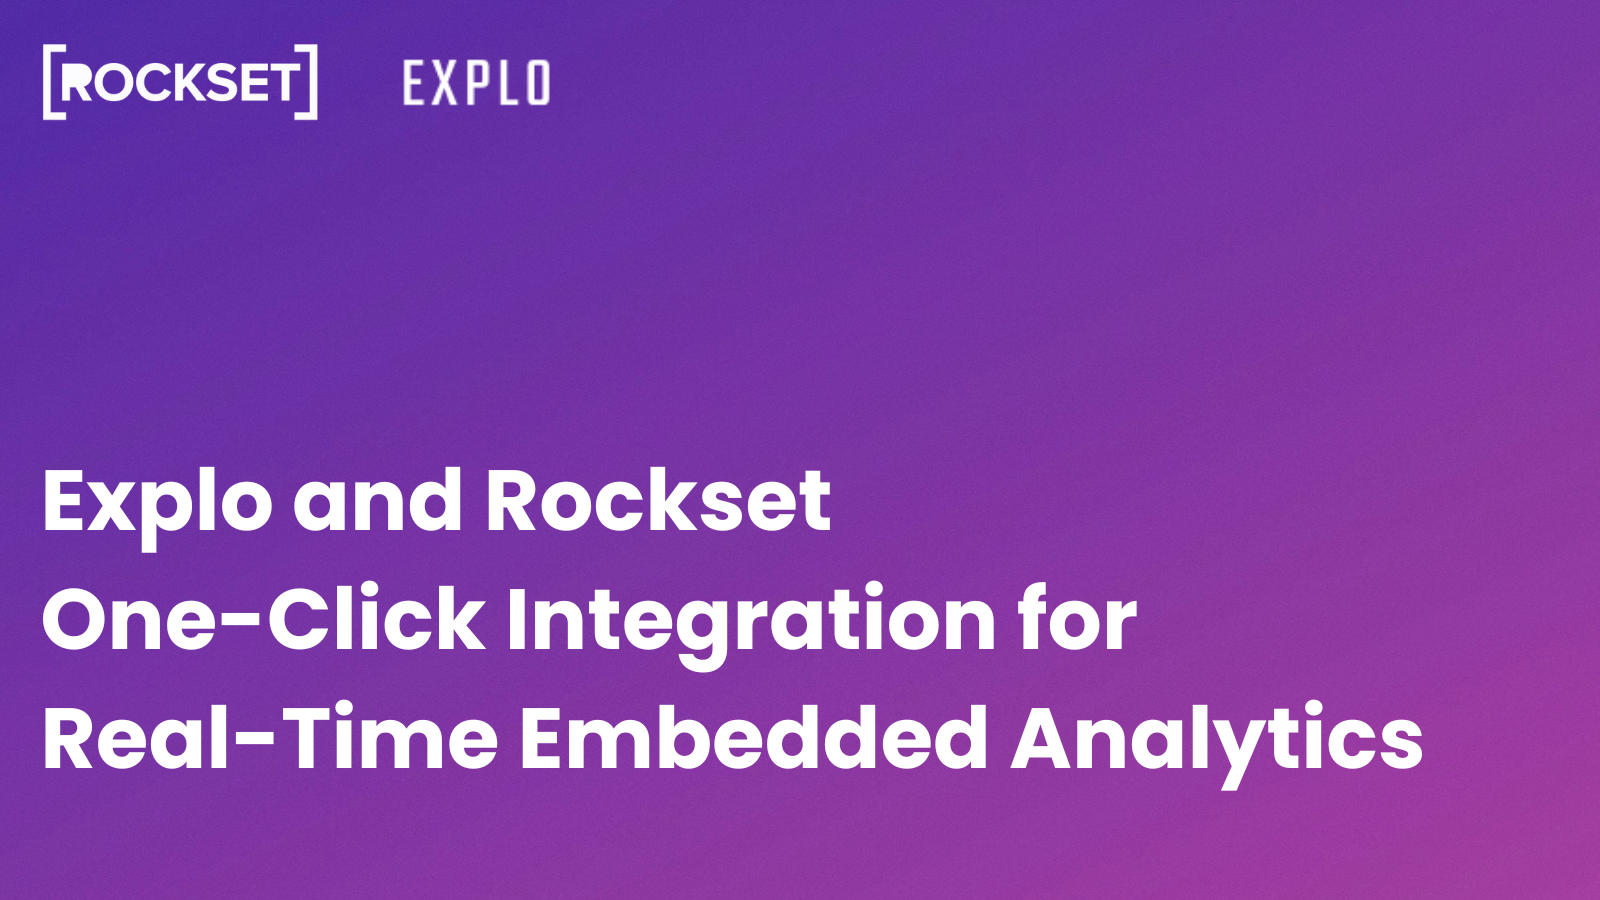 Explo and Rockset One-Click on Integration for Actual-Time Embedded Analytics